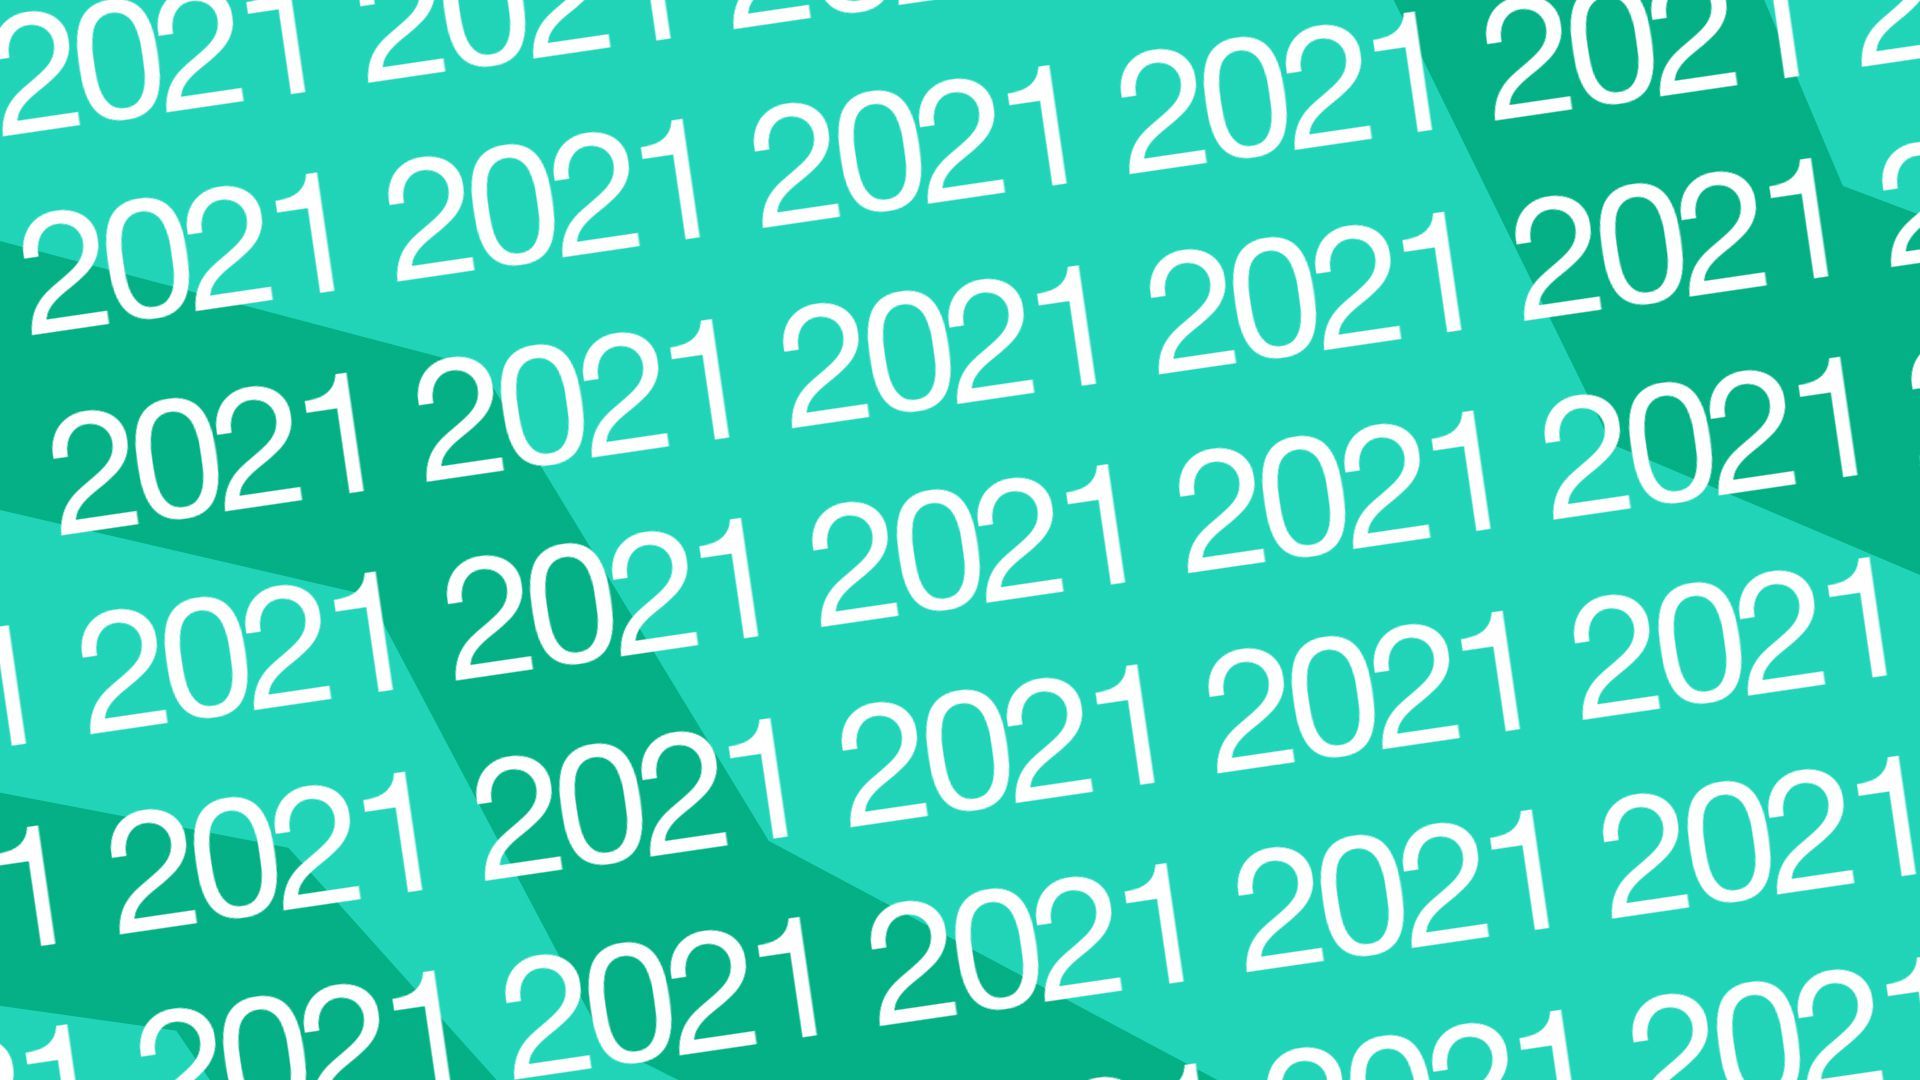 2021 repeating on a teal background.